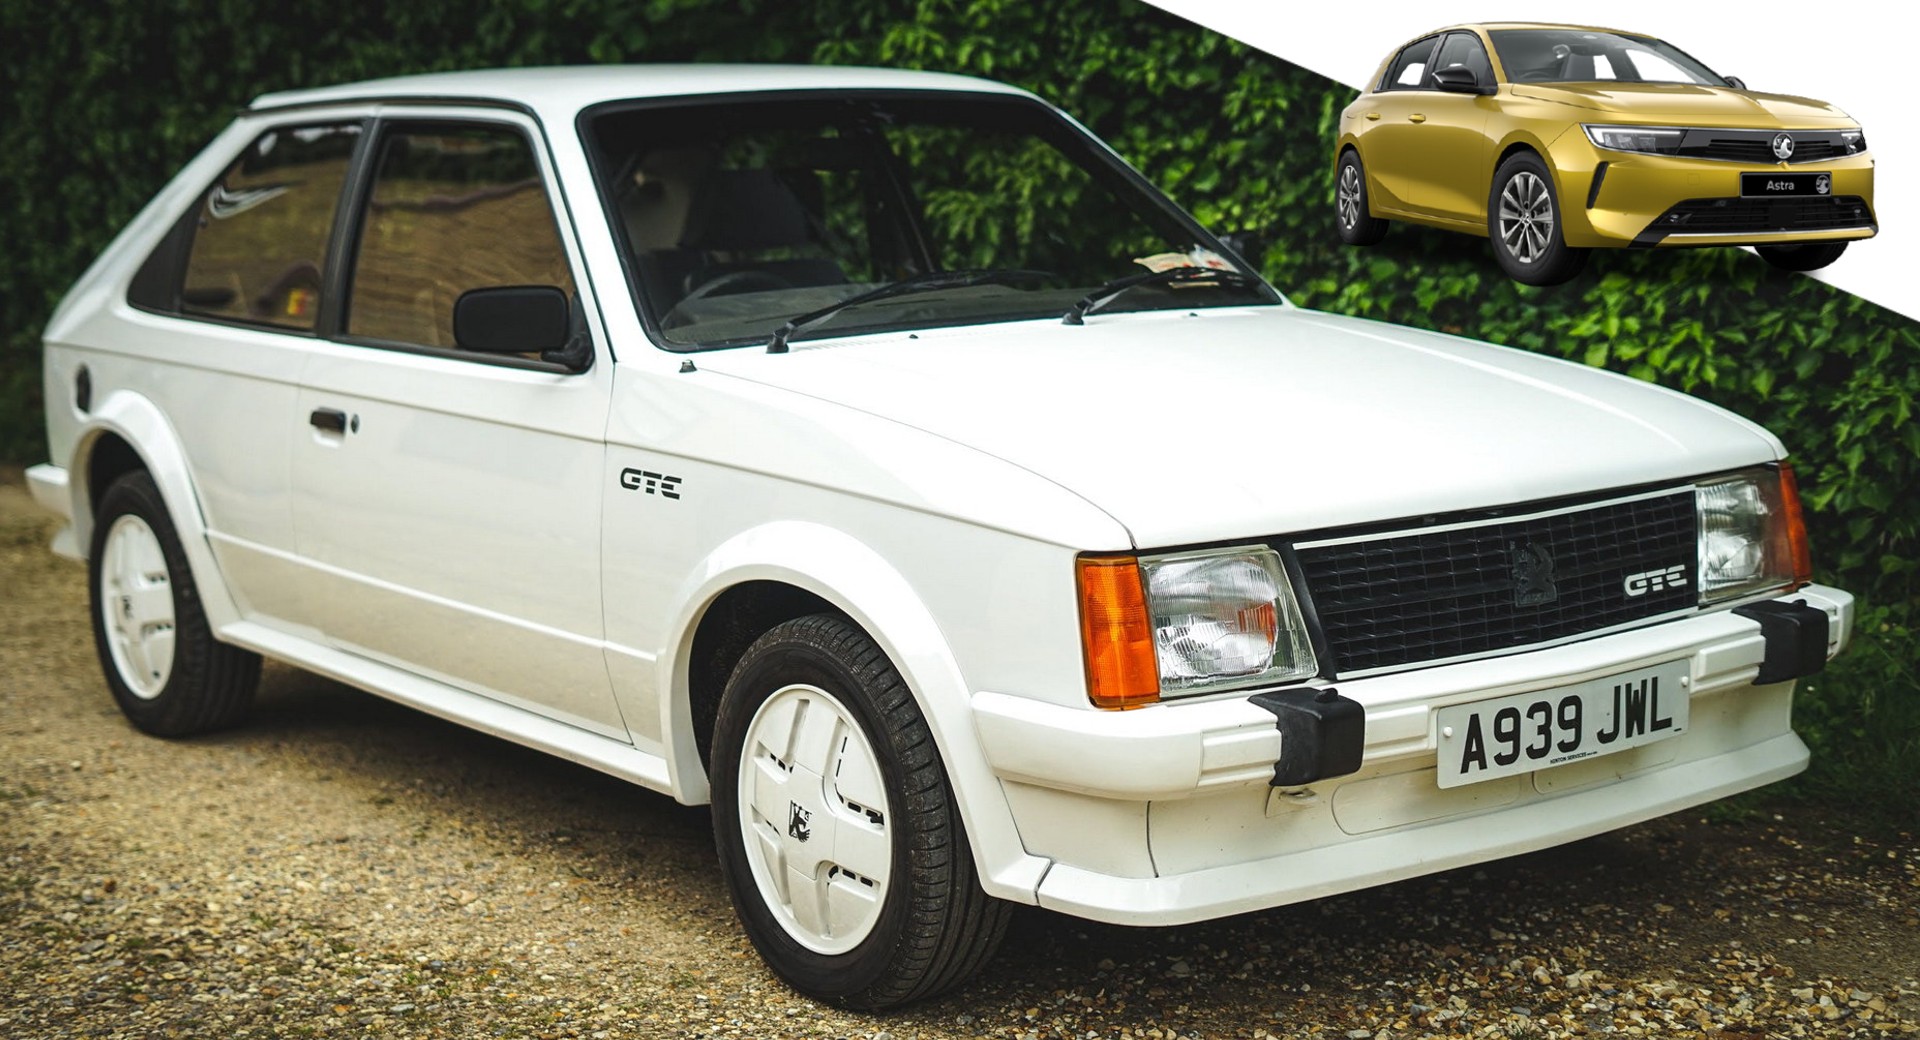 This 1982 Vauxhall Astra GTE Nearly Matched The Price Of New 2022 Vauxhall Astra | Carscoops